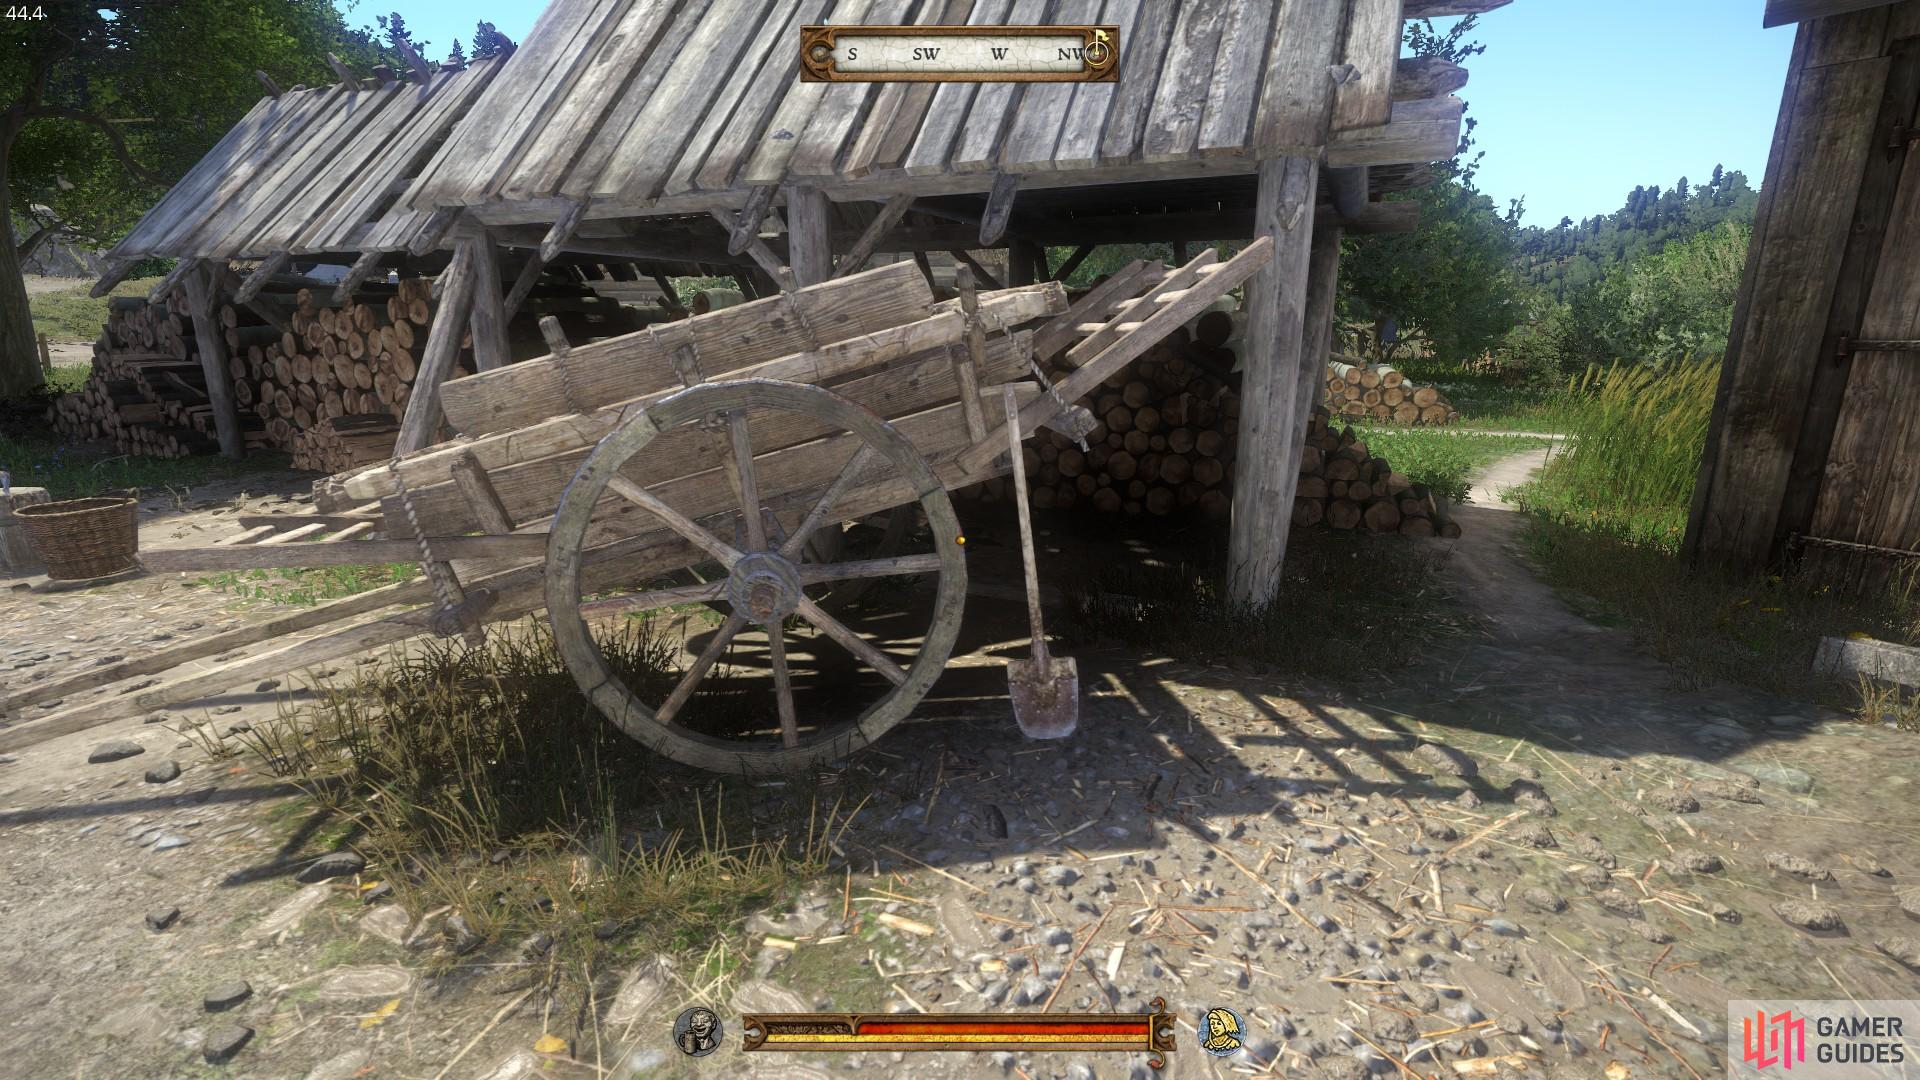 You will find the spade resting on the cart in the grounds of the Rattay Mill. 